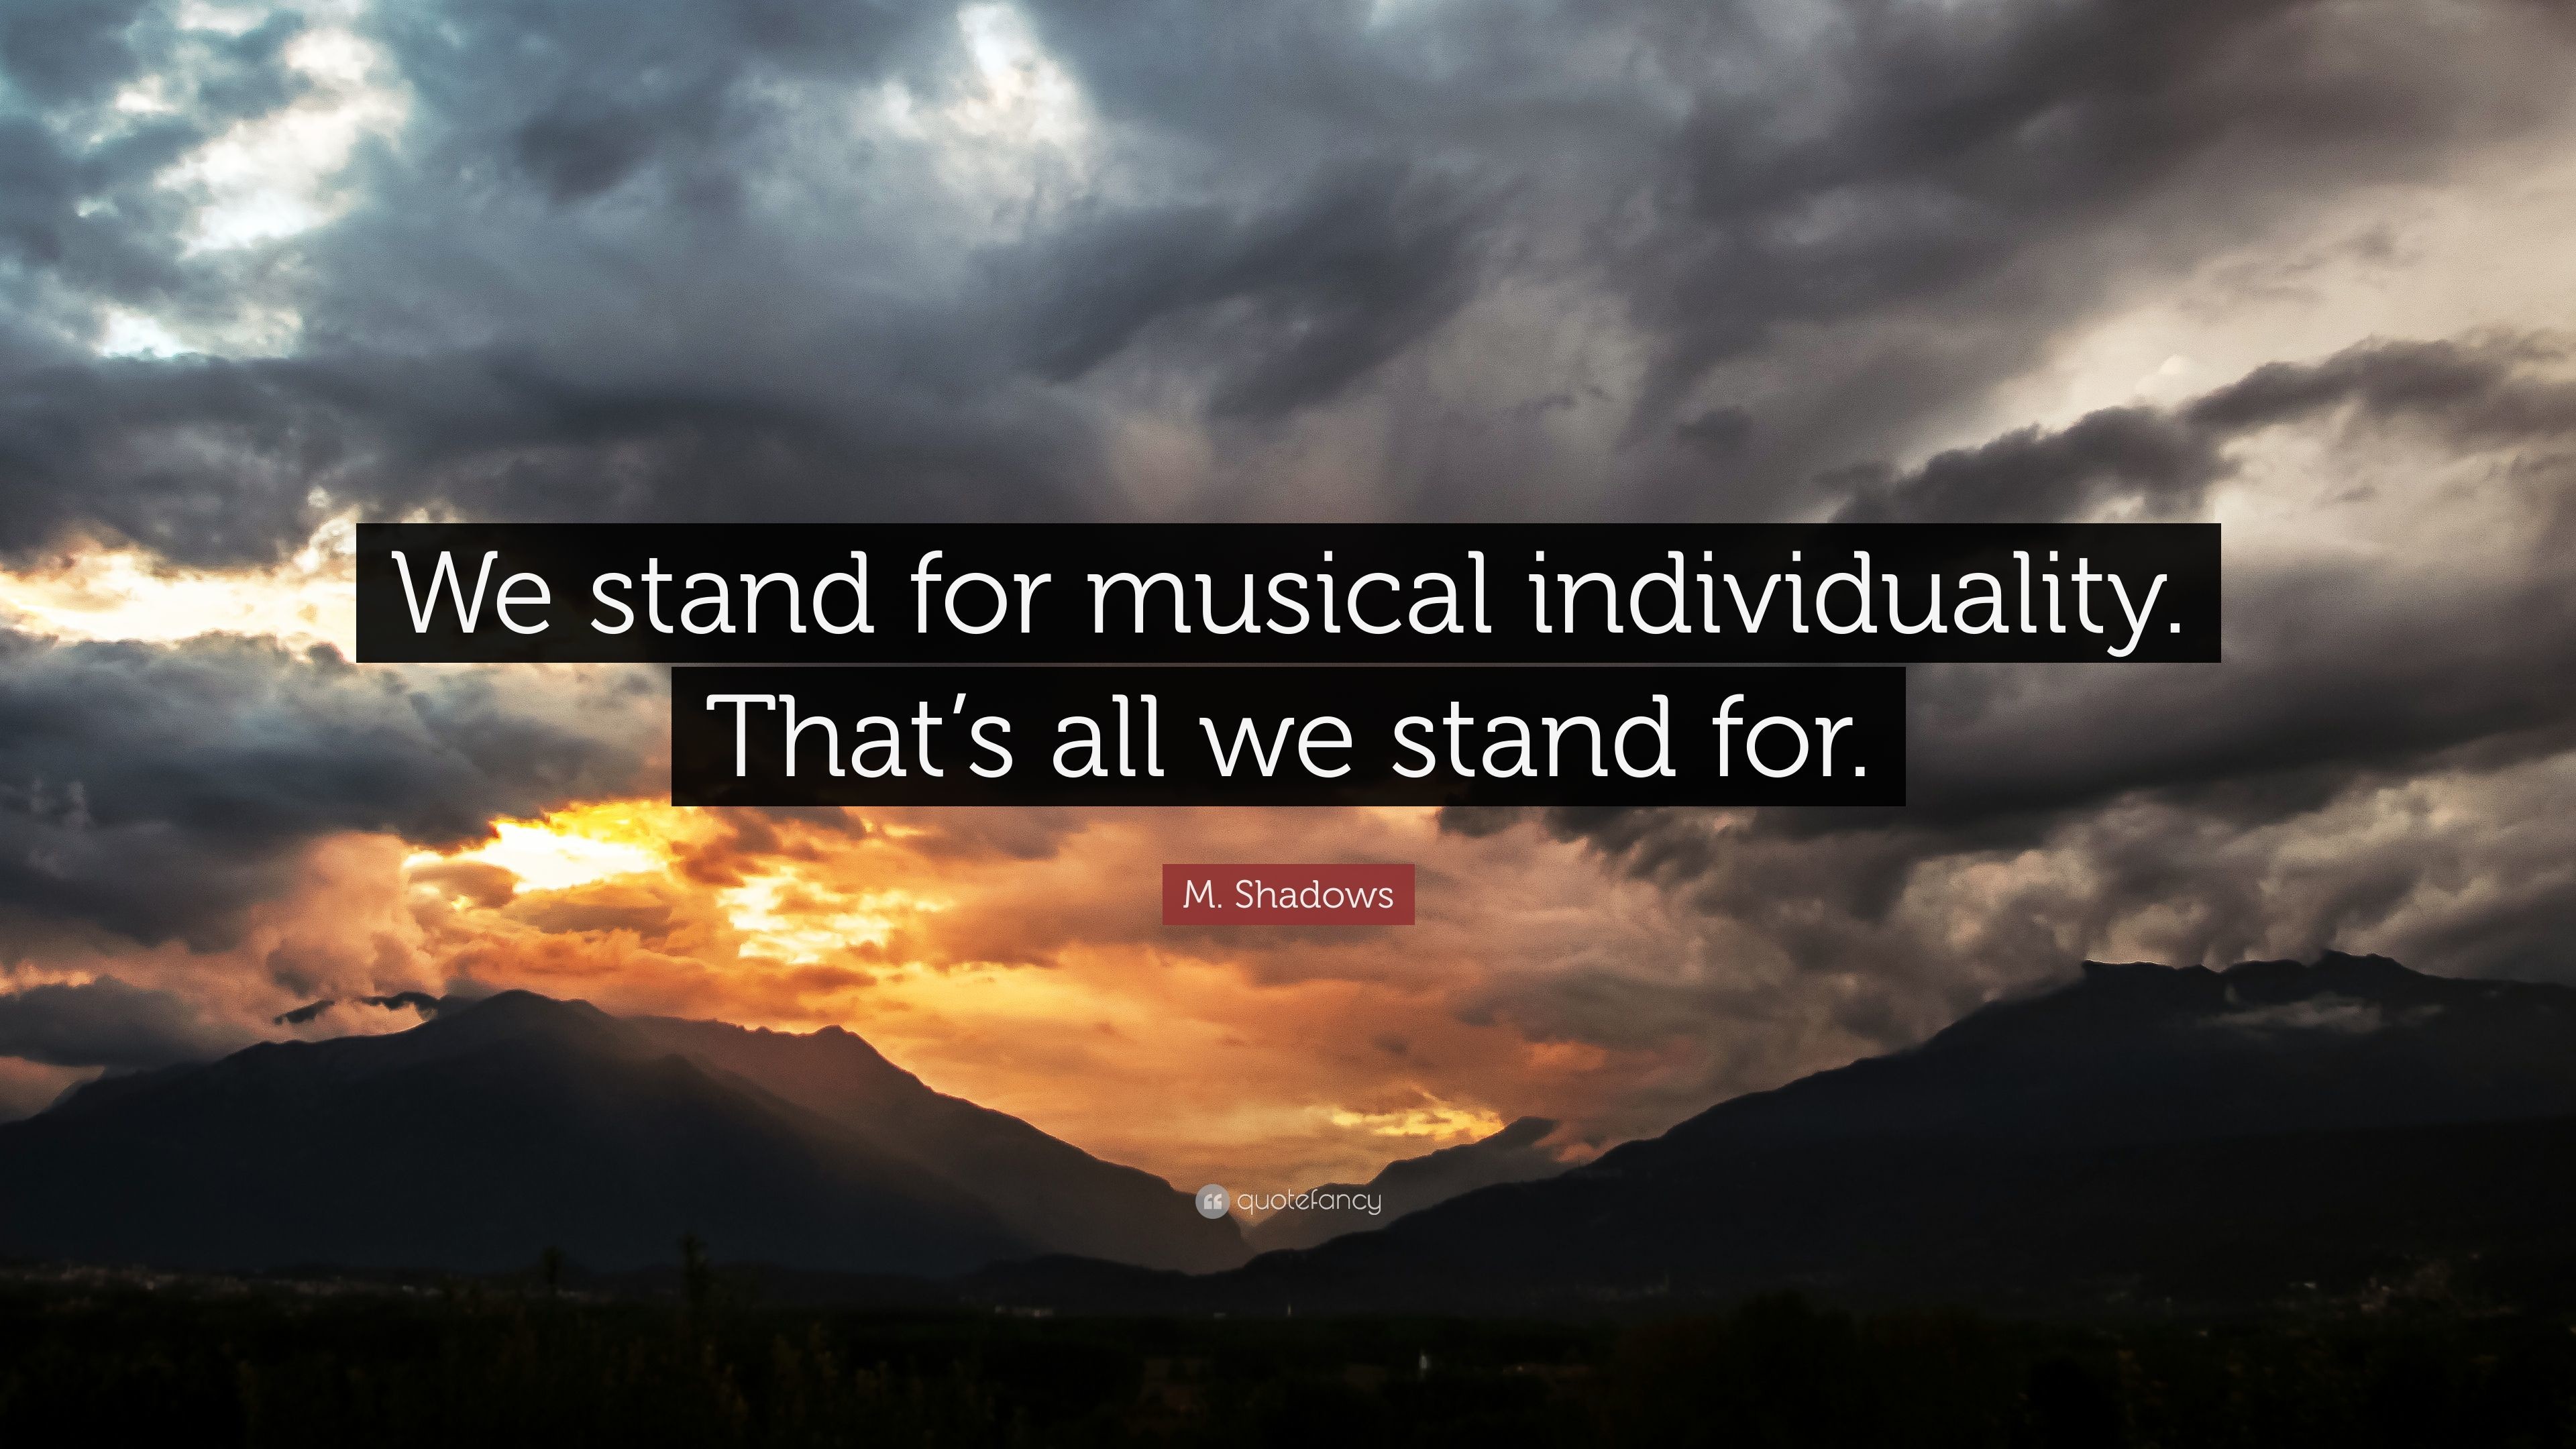 3840x2160 M. Shadows Quote: “We stand for musical individuality. That's all we stand